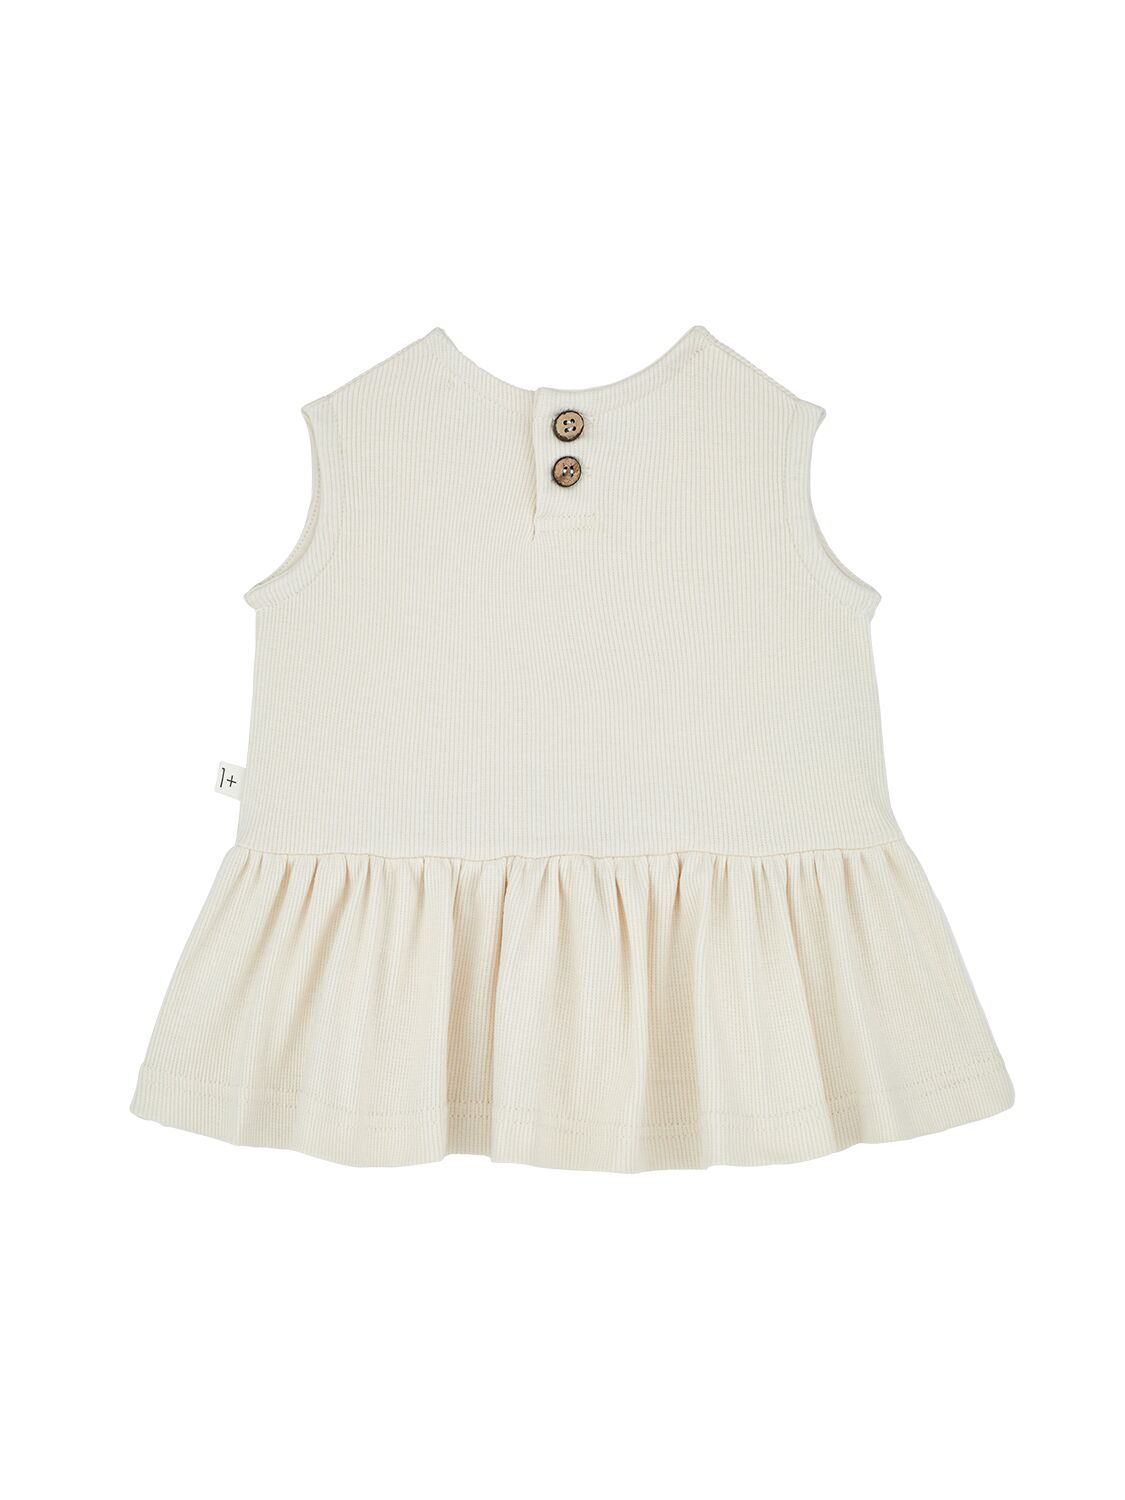 Image of Cotton Jersey Top